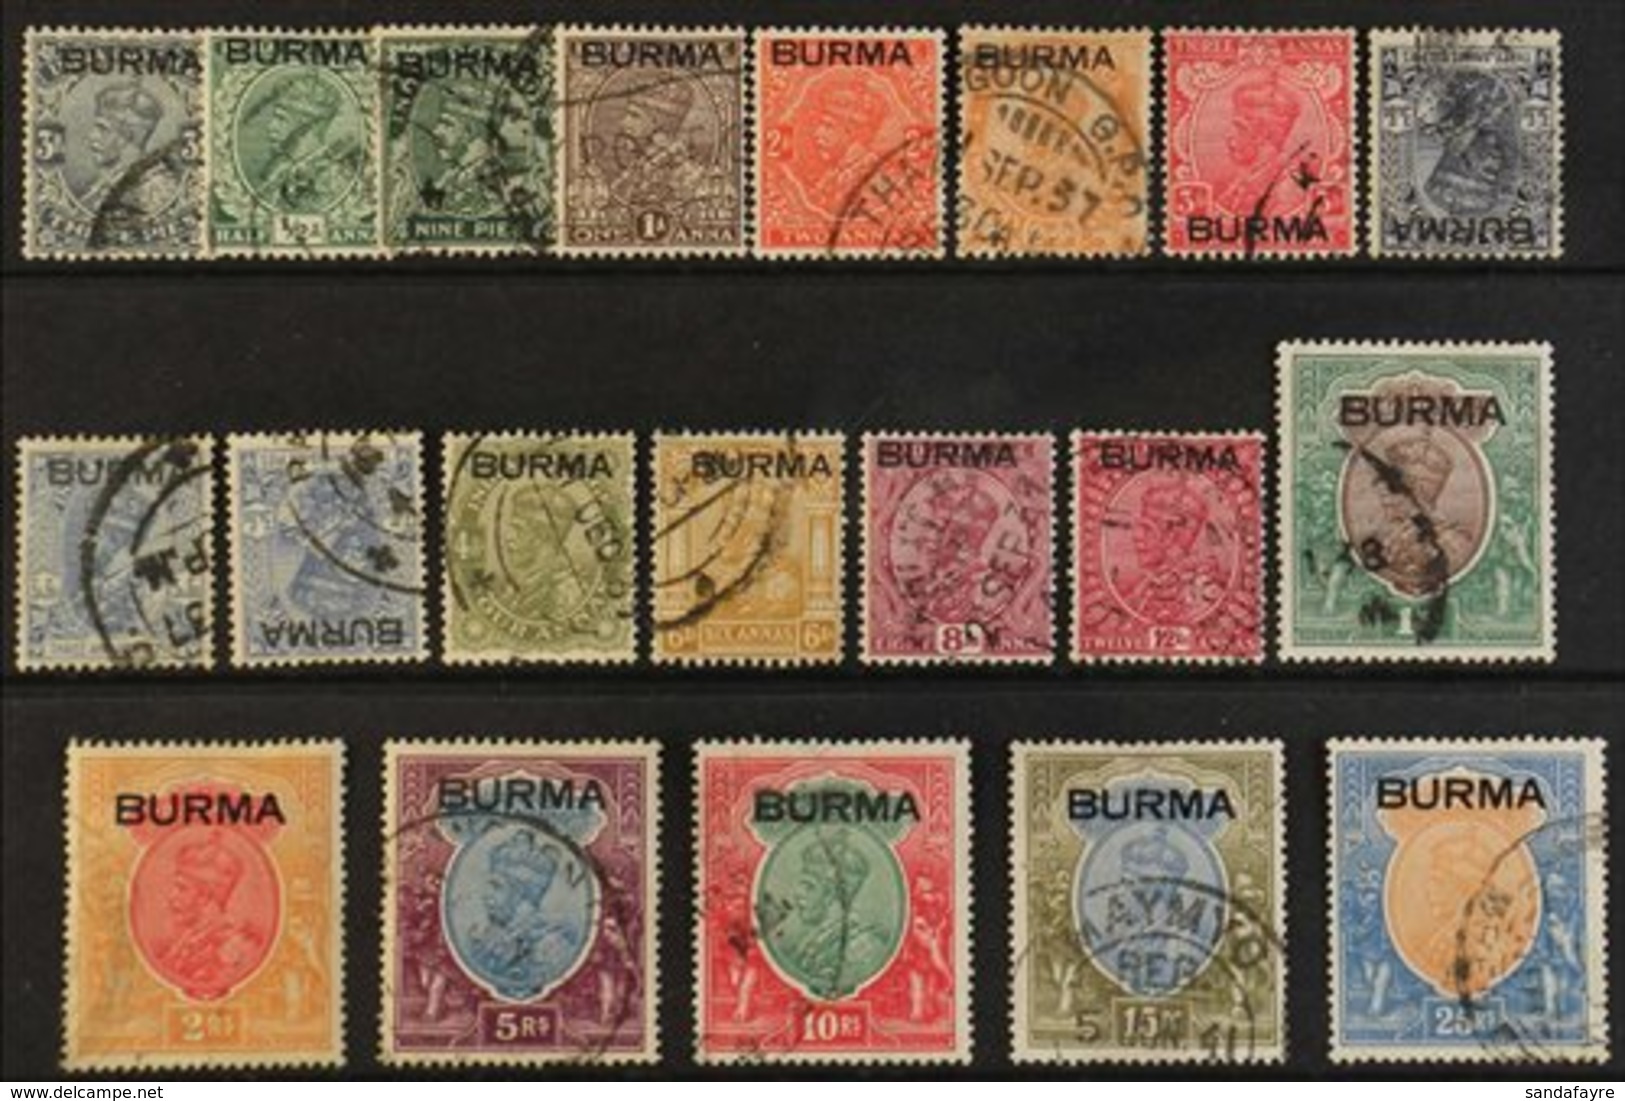 1937 KGV India Definitives Set Overprinted "BURMA" With Additional 3a6p Dull Blue, Both Wmk Upright & Inverted, SG 1/18, - Burma (...-1947)